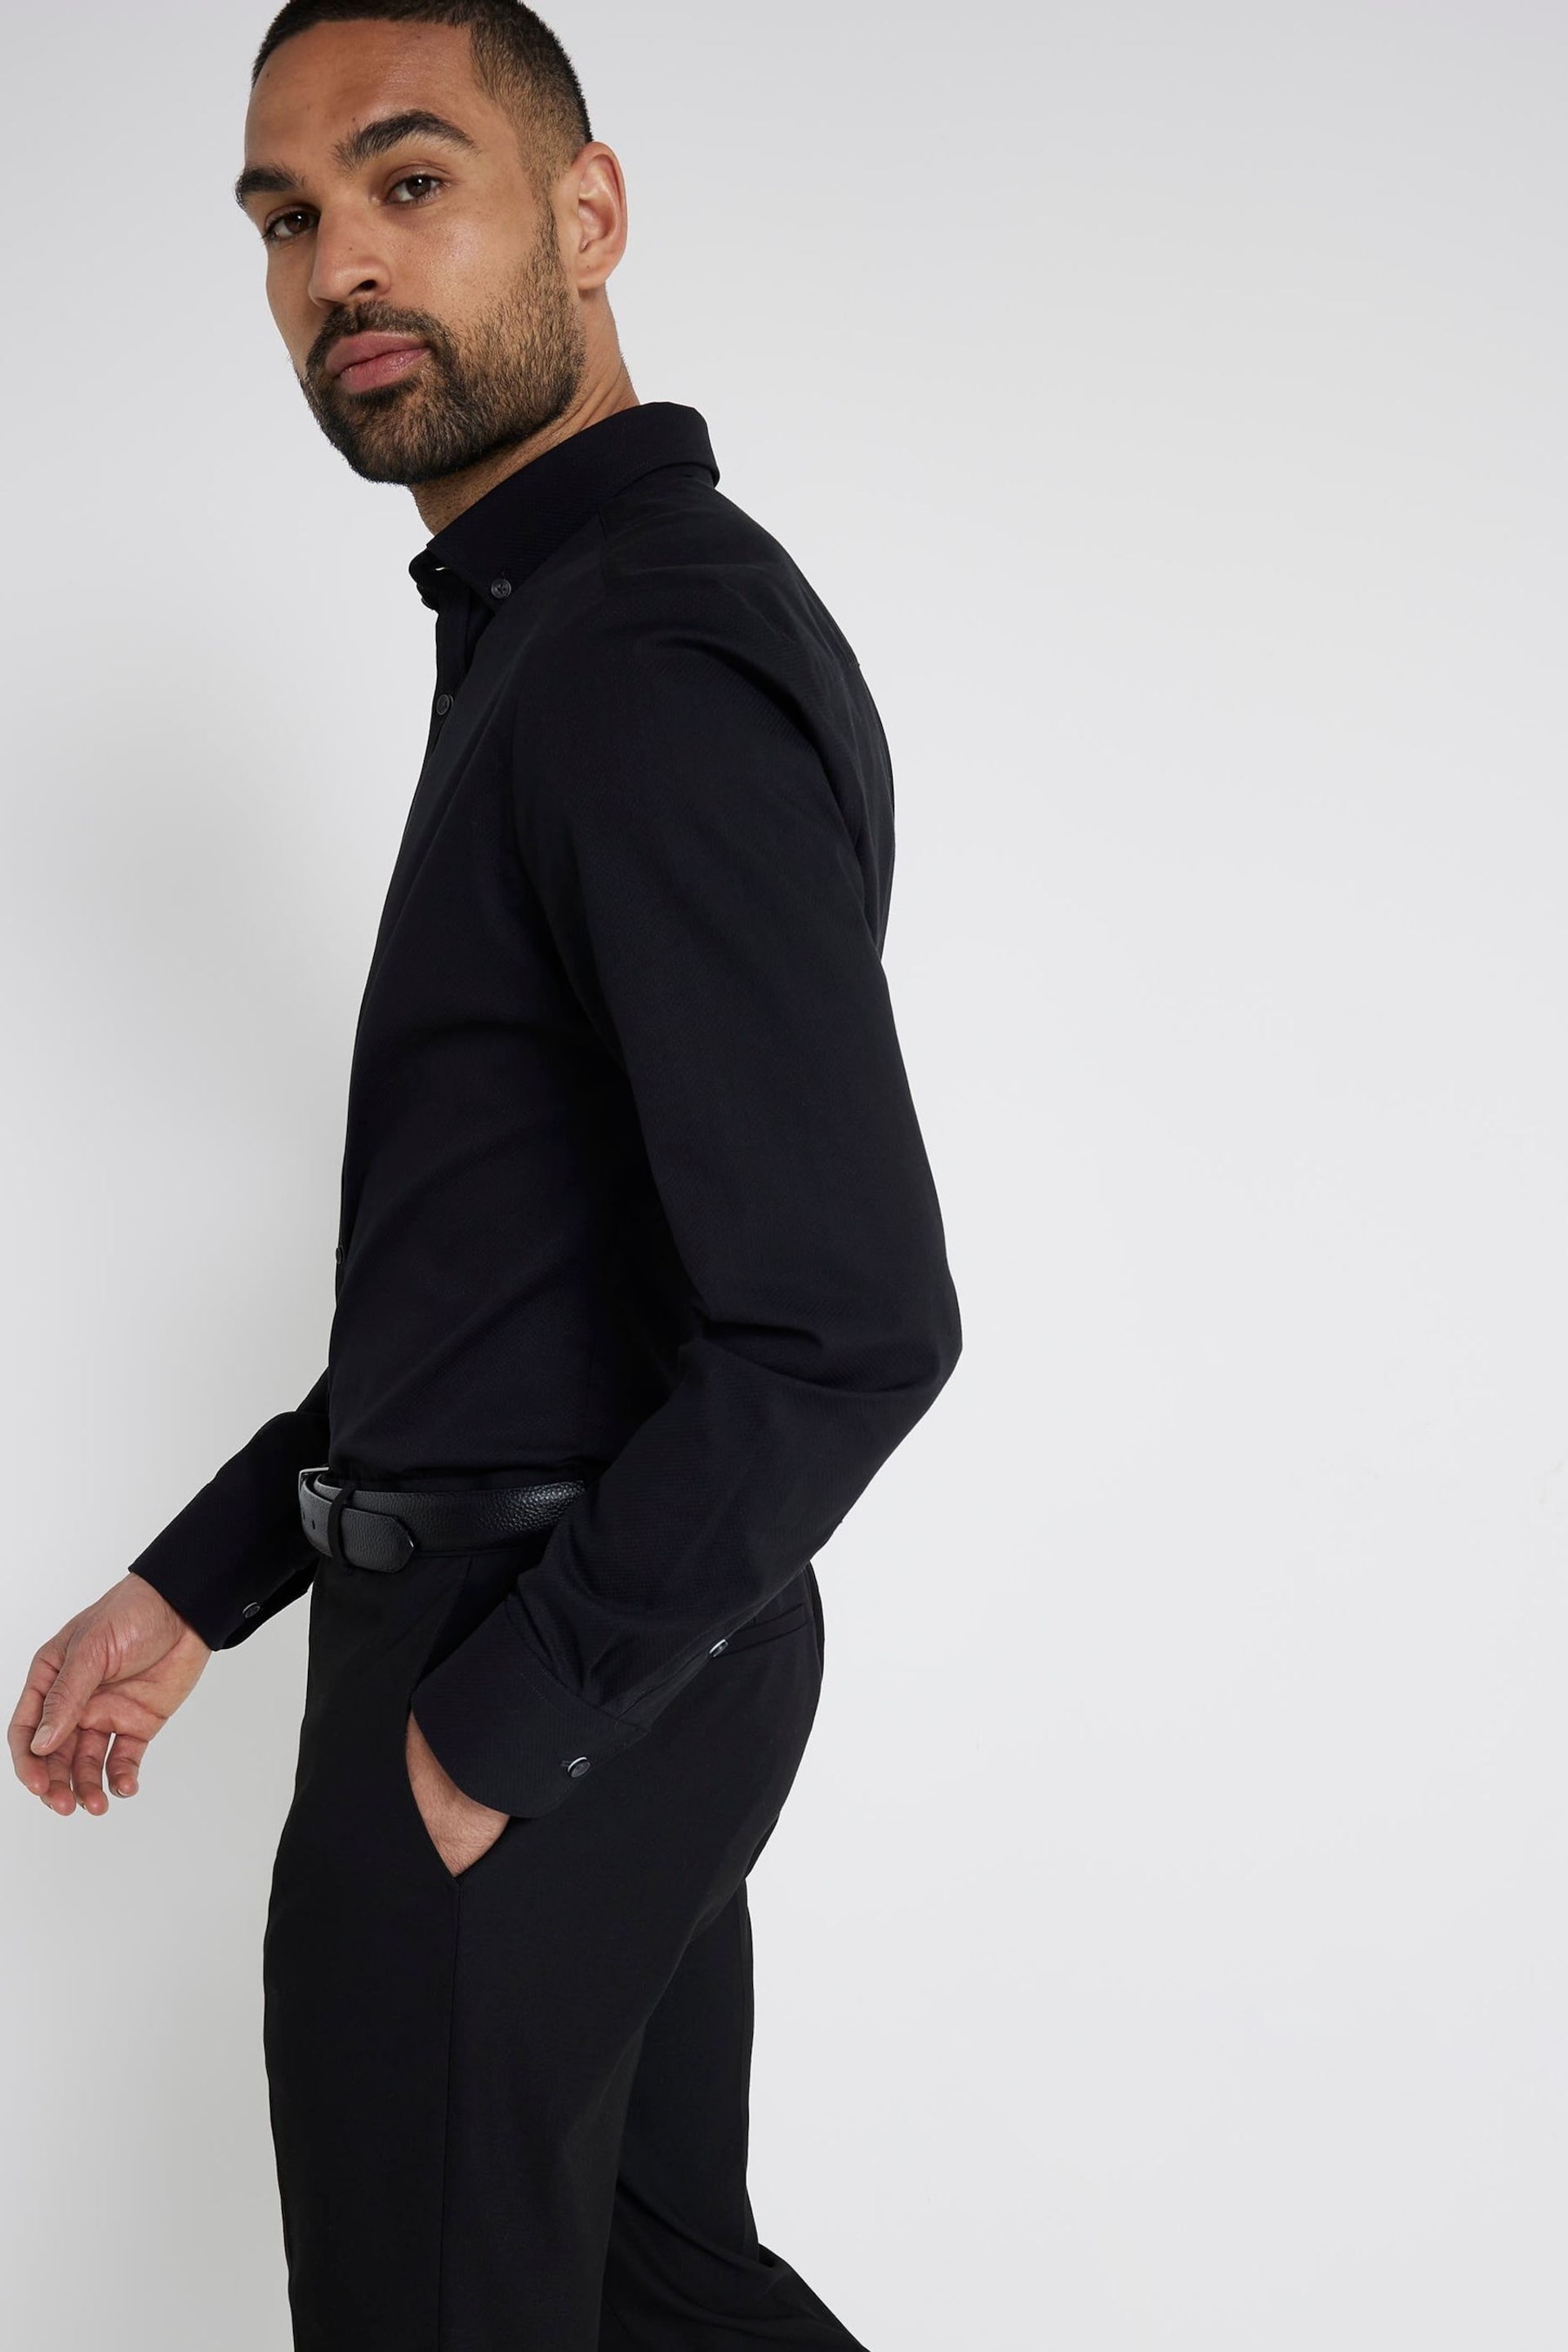 River Island Black Muscle Fit Long Sleeve Textured Shirt - Image 2 of 4